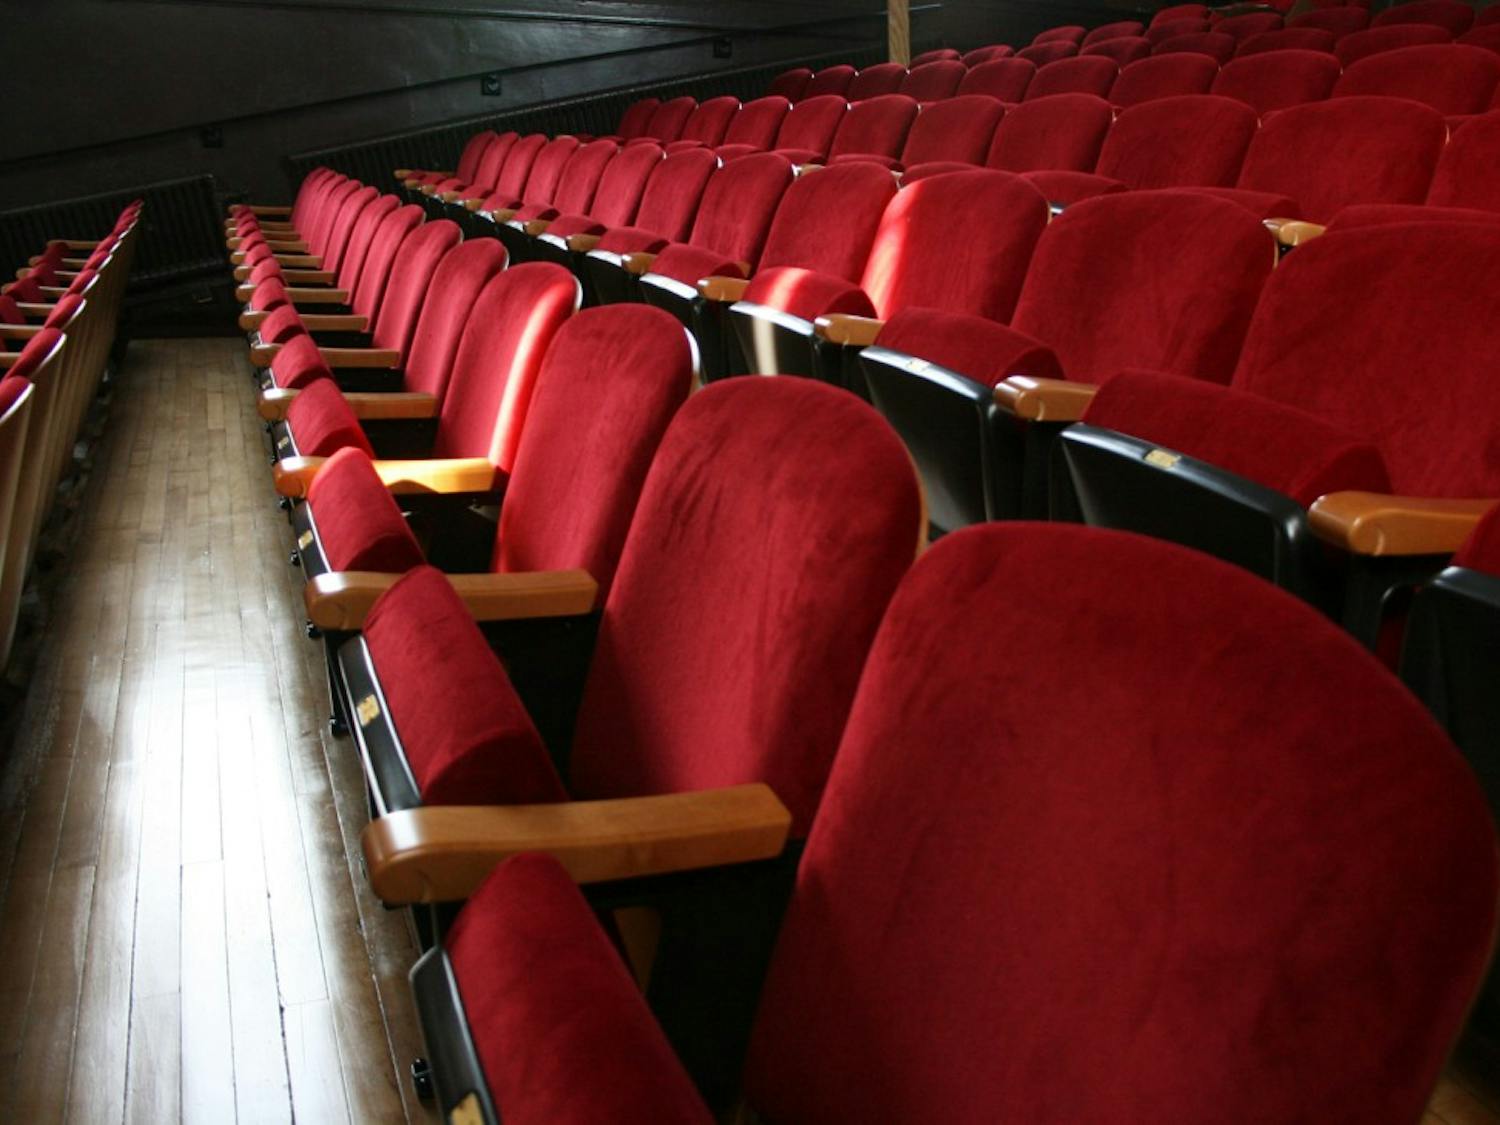 The Historic Playmakers Theatre on Cameron Avenue will reopen after renovations to the carpeting and seating on Tuesday night for A Night of Poetry with Def Poet Shihan Van Clief.